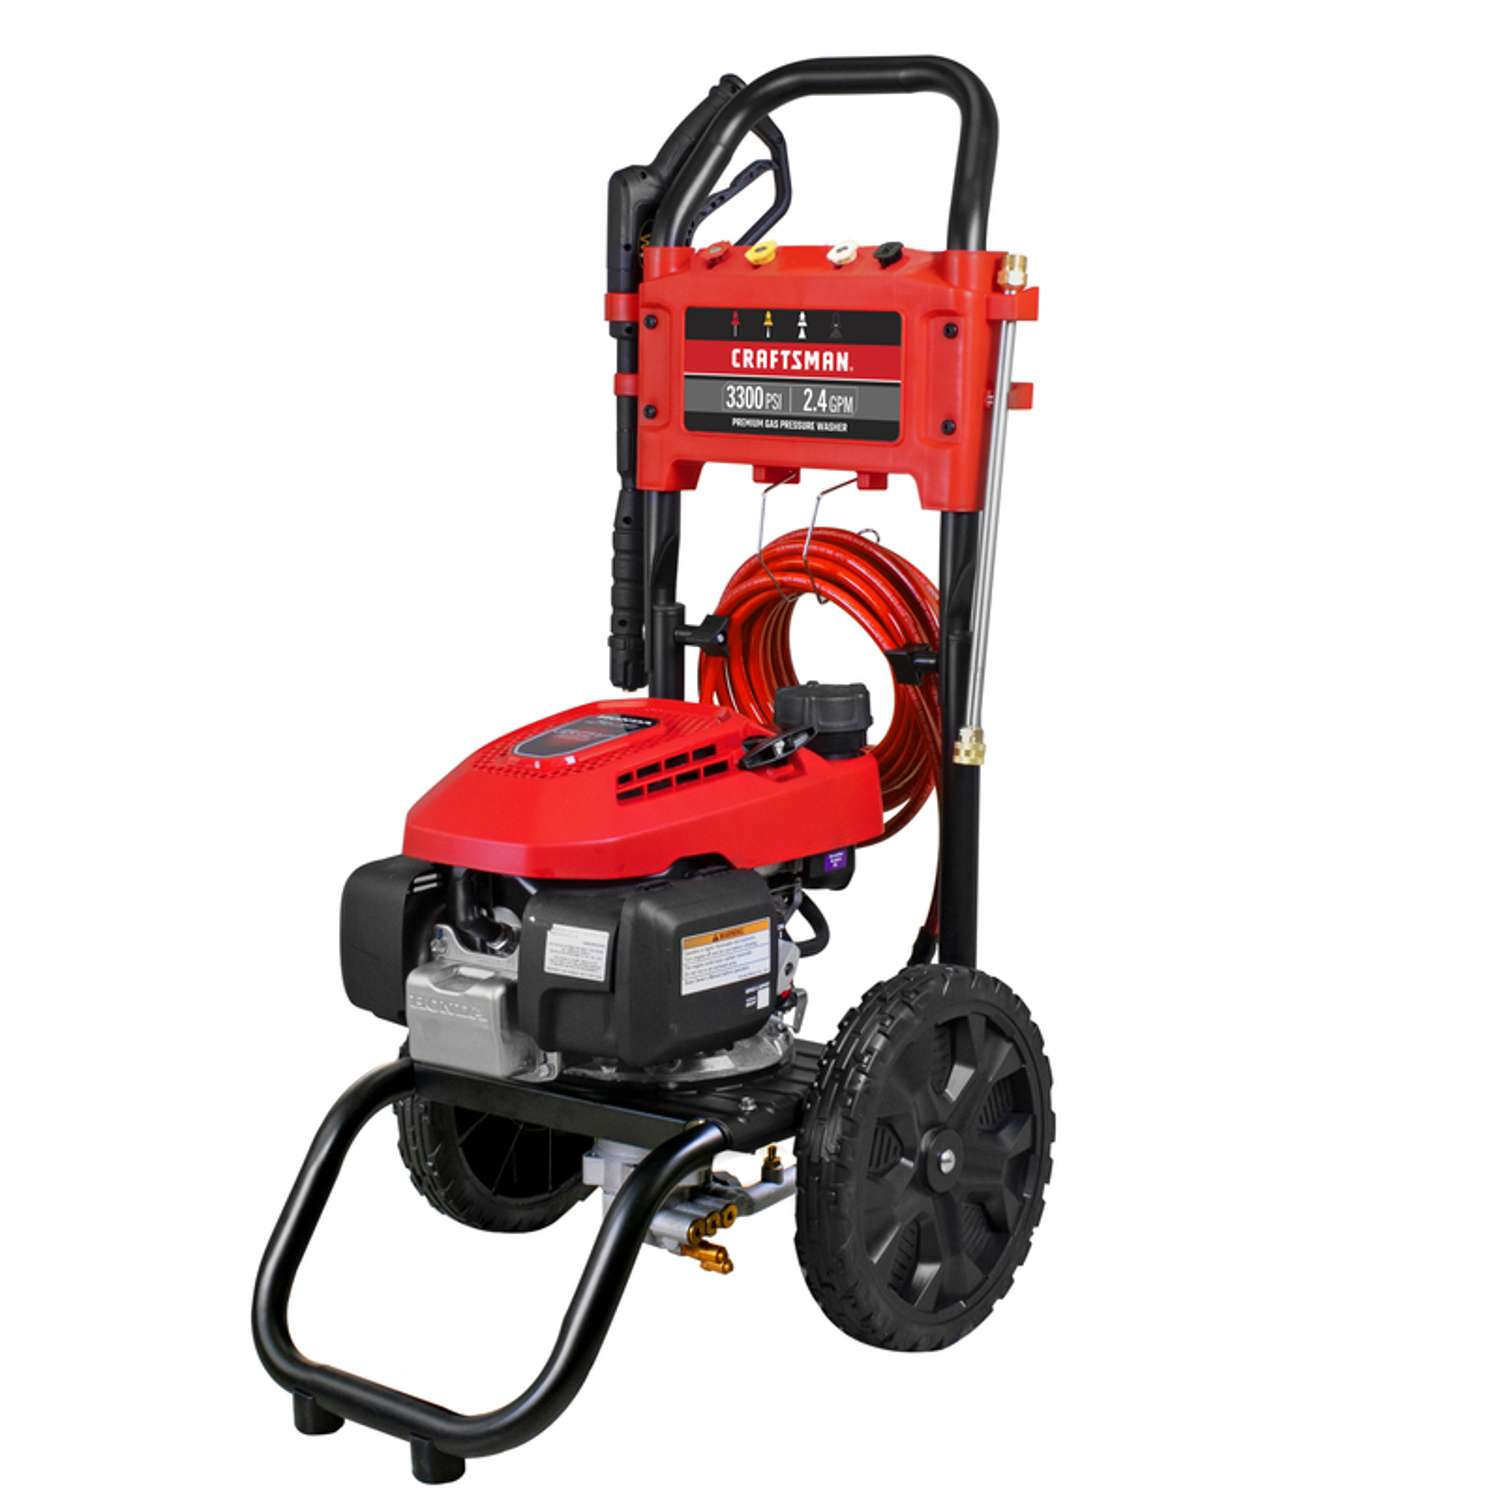 Ace Hardware Father's Day Deals: Up to an extra $50 off on Craftsman items